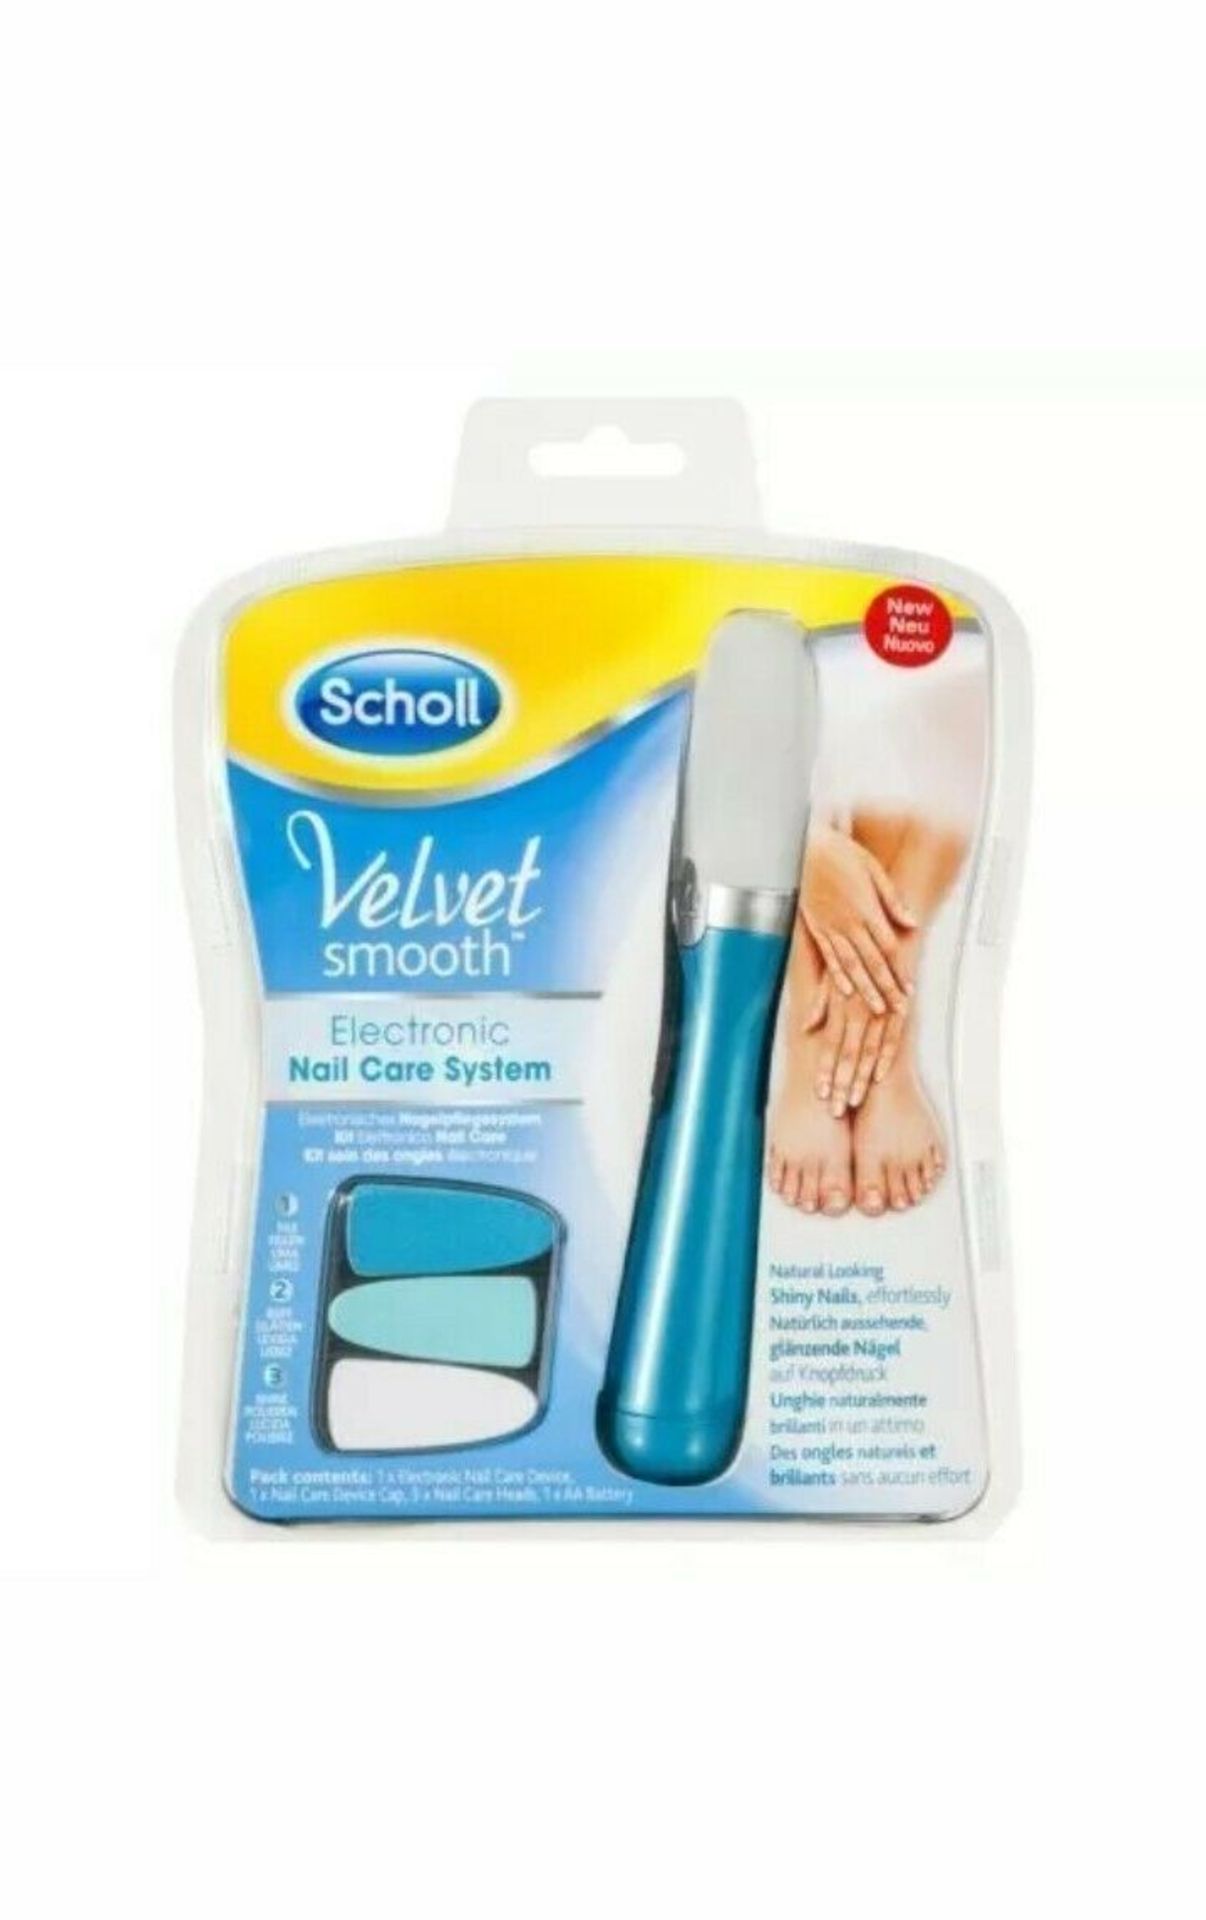 500x Brand New Scholl Nail Care System